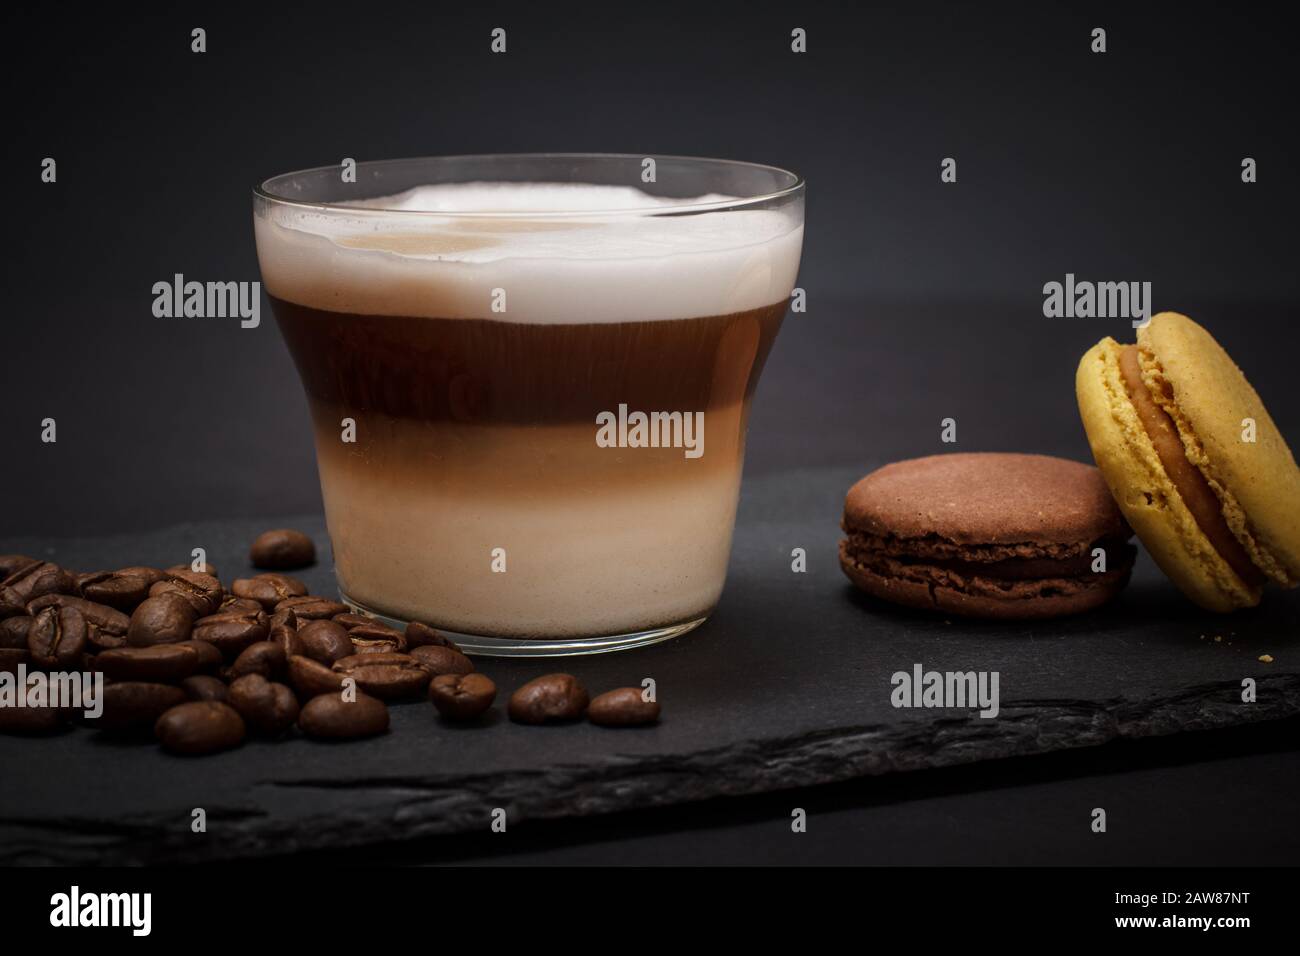 Cup of cappuccino, coffee beans and macaroons on black background. Stock Photo